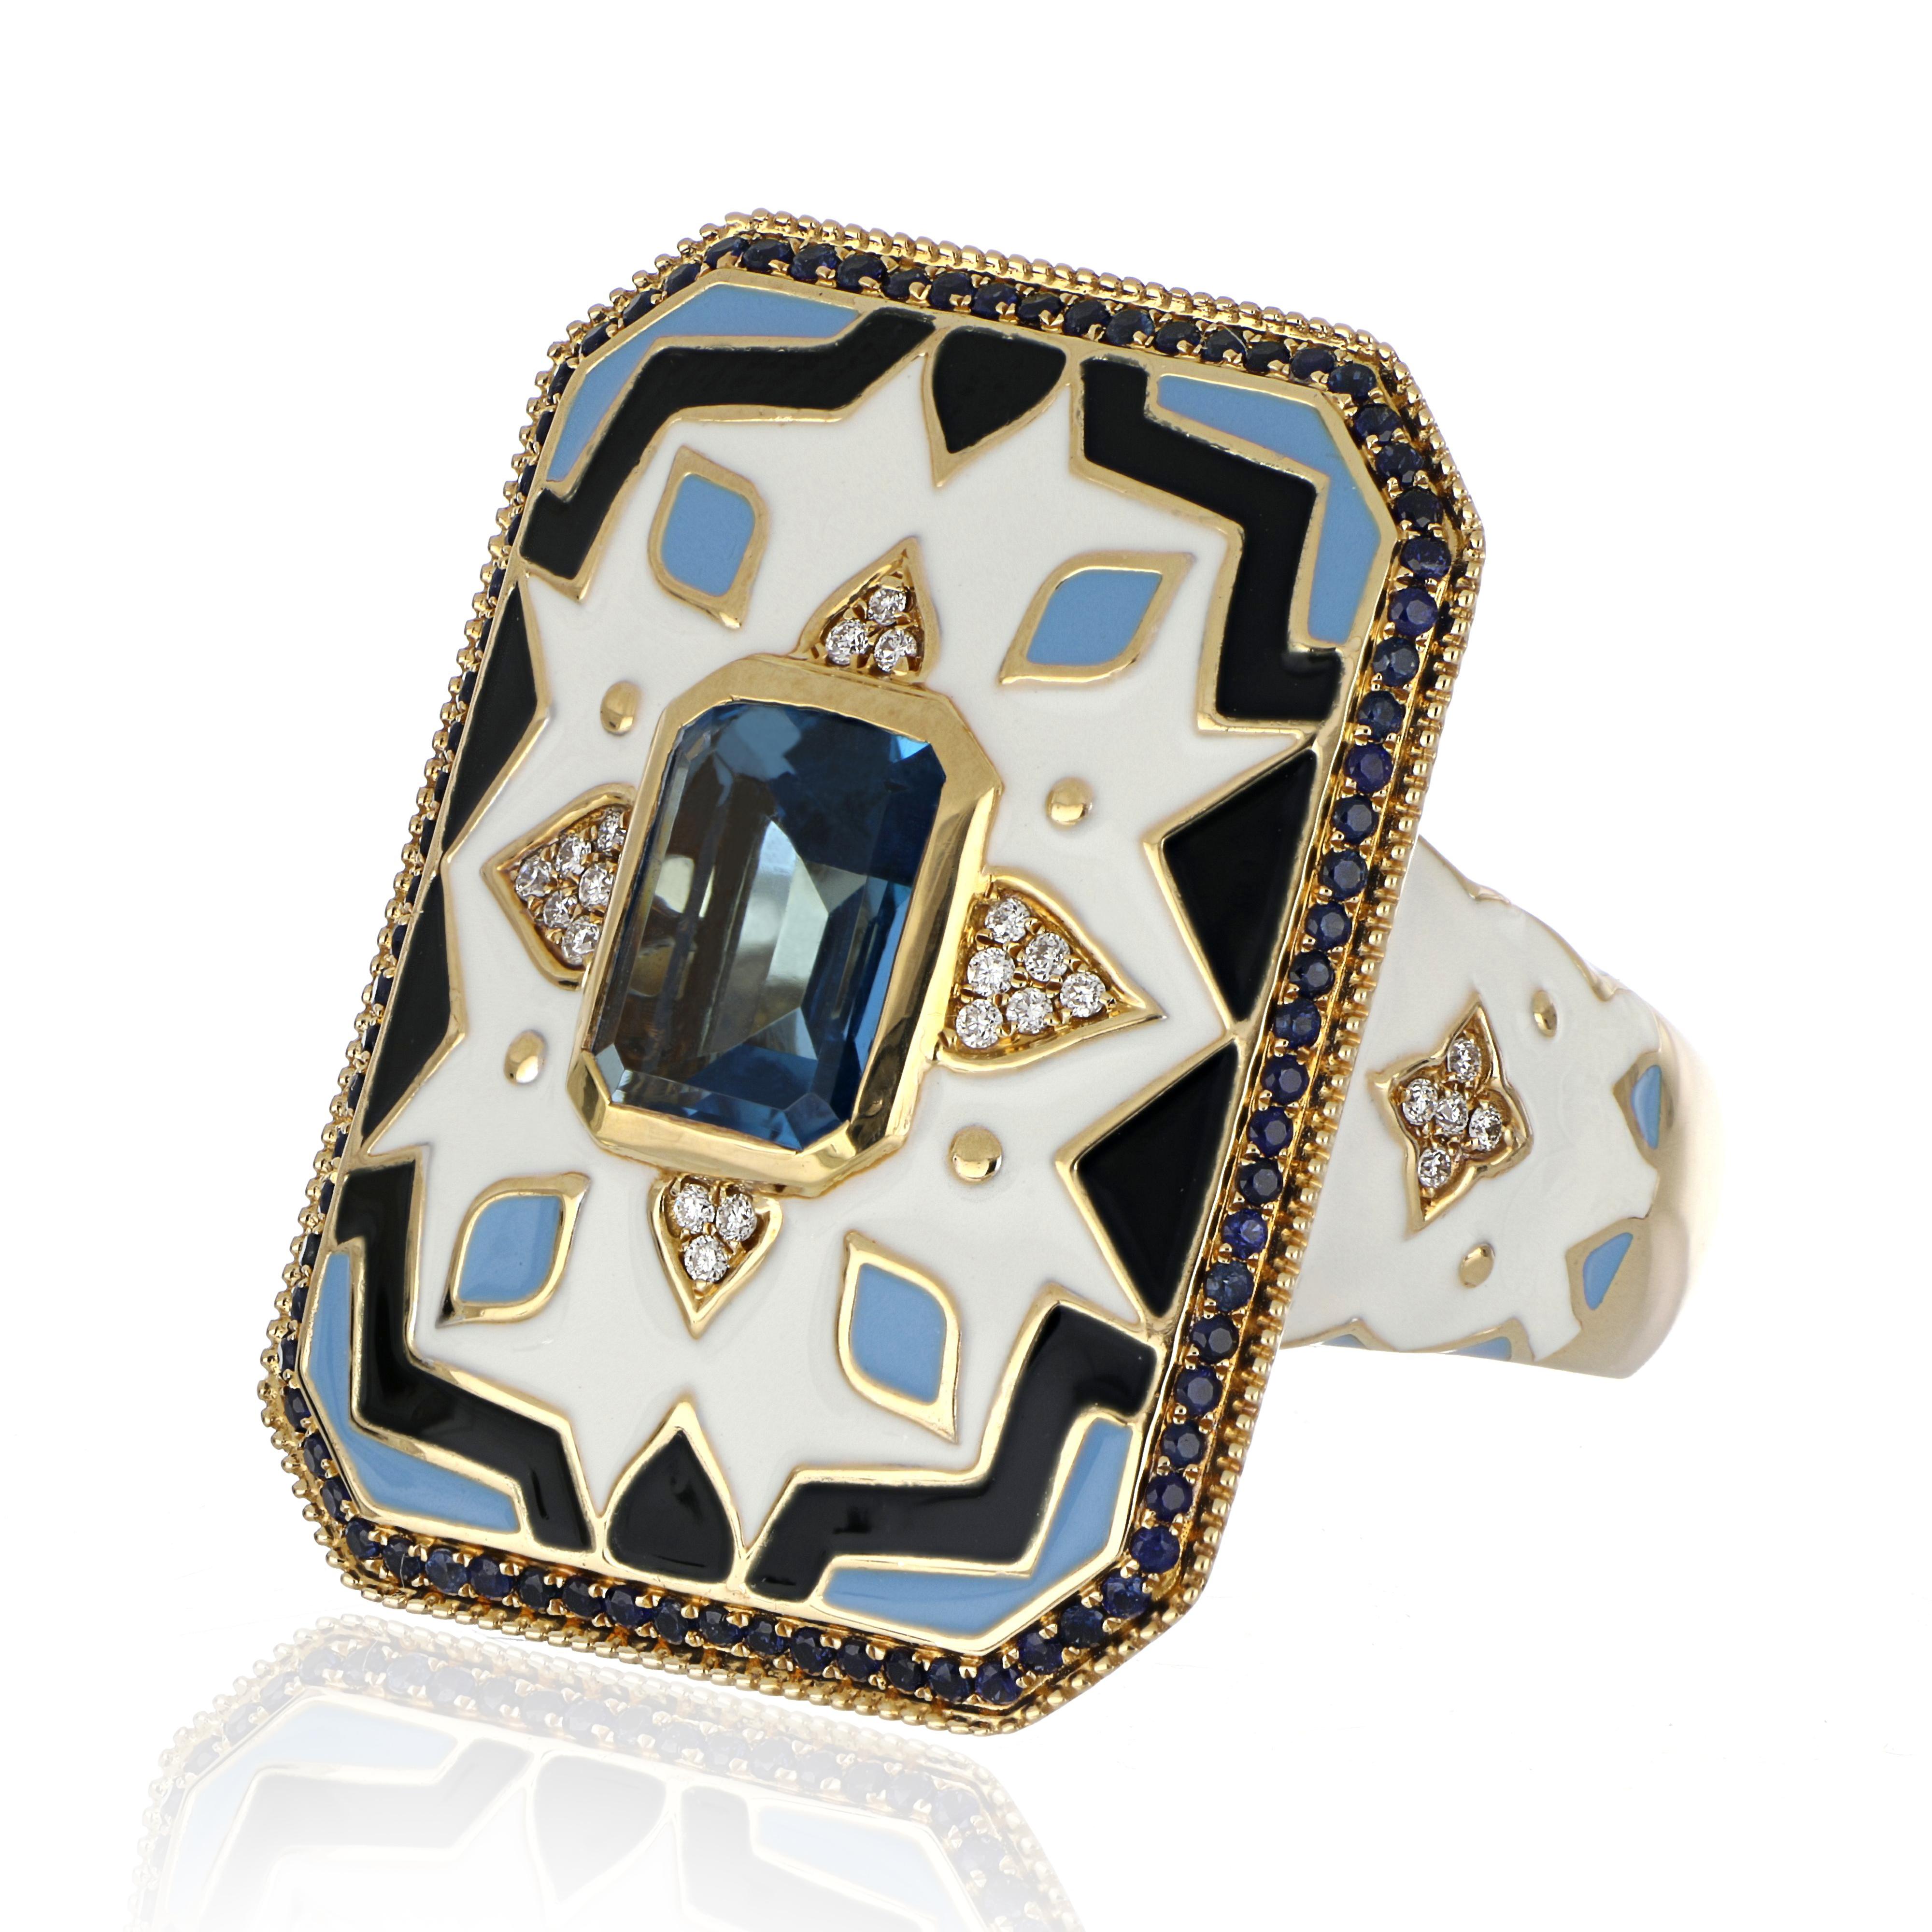 Elegant and exquisite Enamel Cocktail 14 K Ring, center set with 2.77 Cts. Octagon Cut Swiss Blue Topaz. Surrounded with Blue Sapphire Rounds 0.36 Cts. accented with Diamonds, weighing approx. 0.10 cts. Beautifully Hand crafted in 14 Karat Yellow